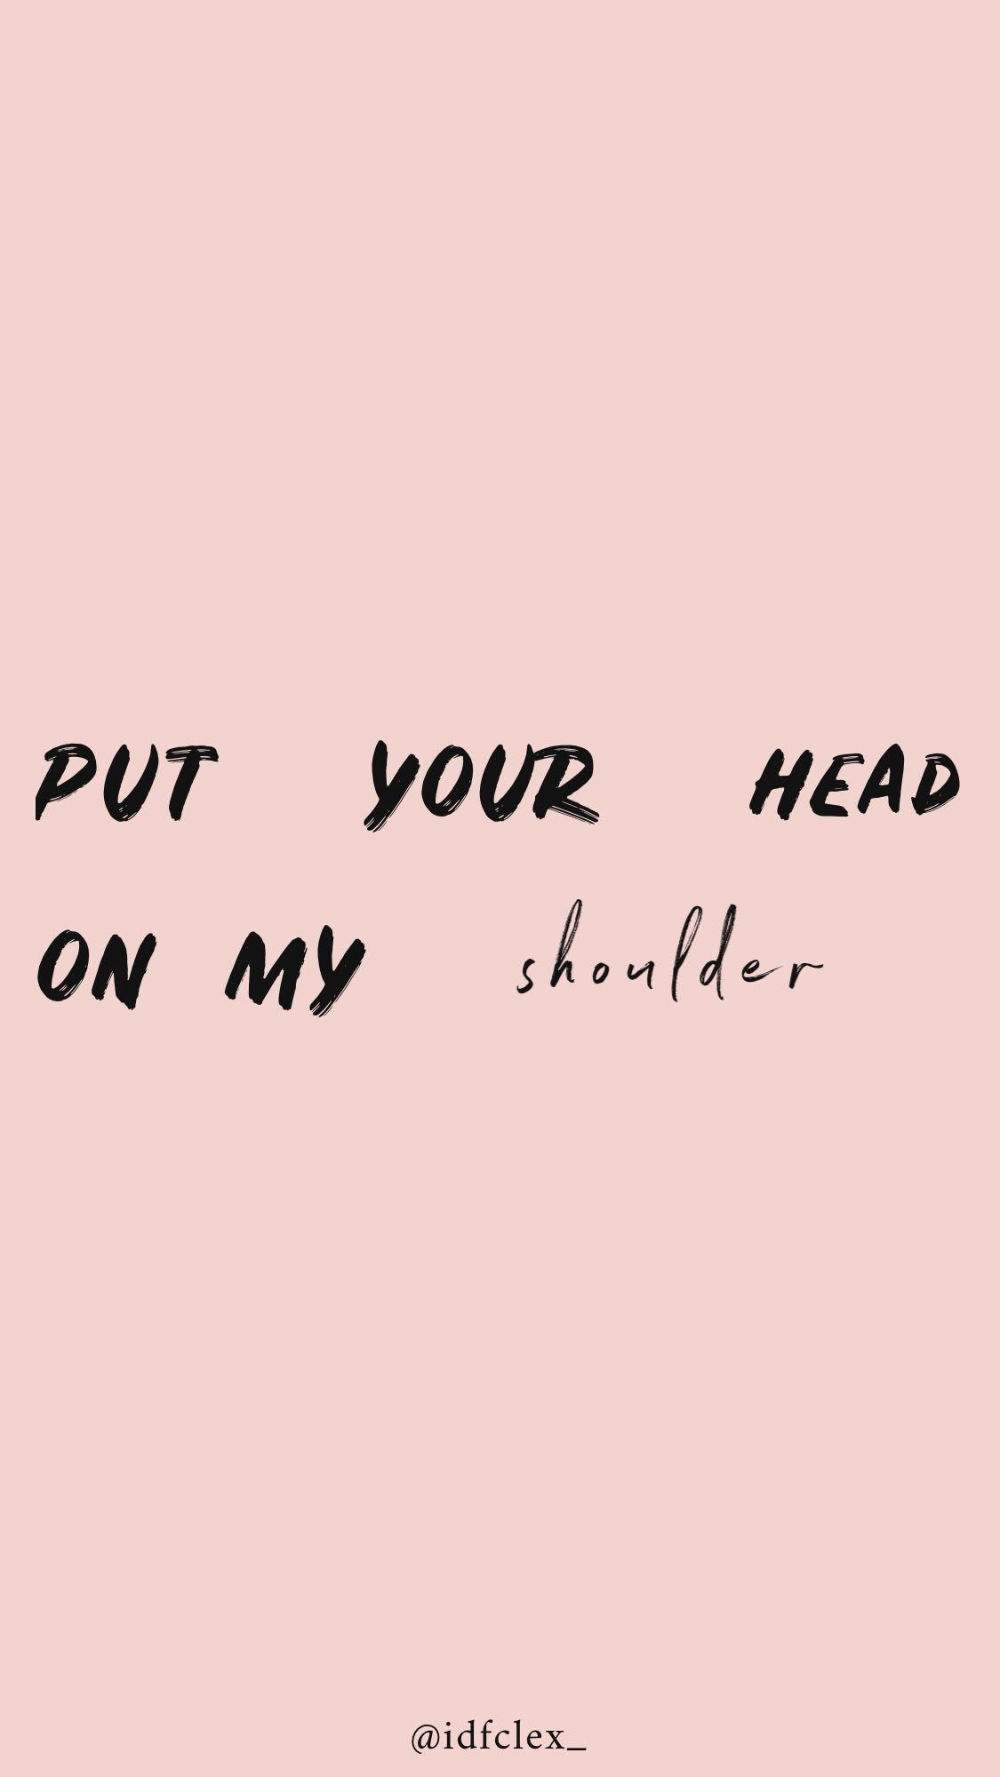 put your head on my shoulder iphone